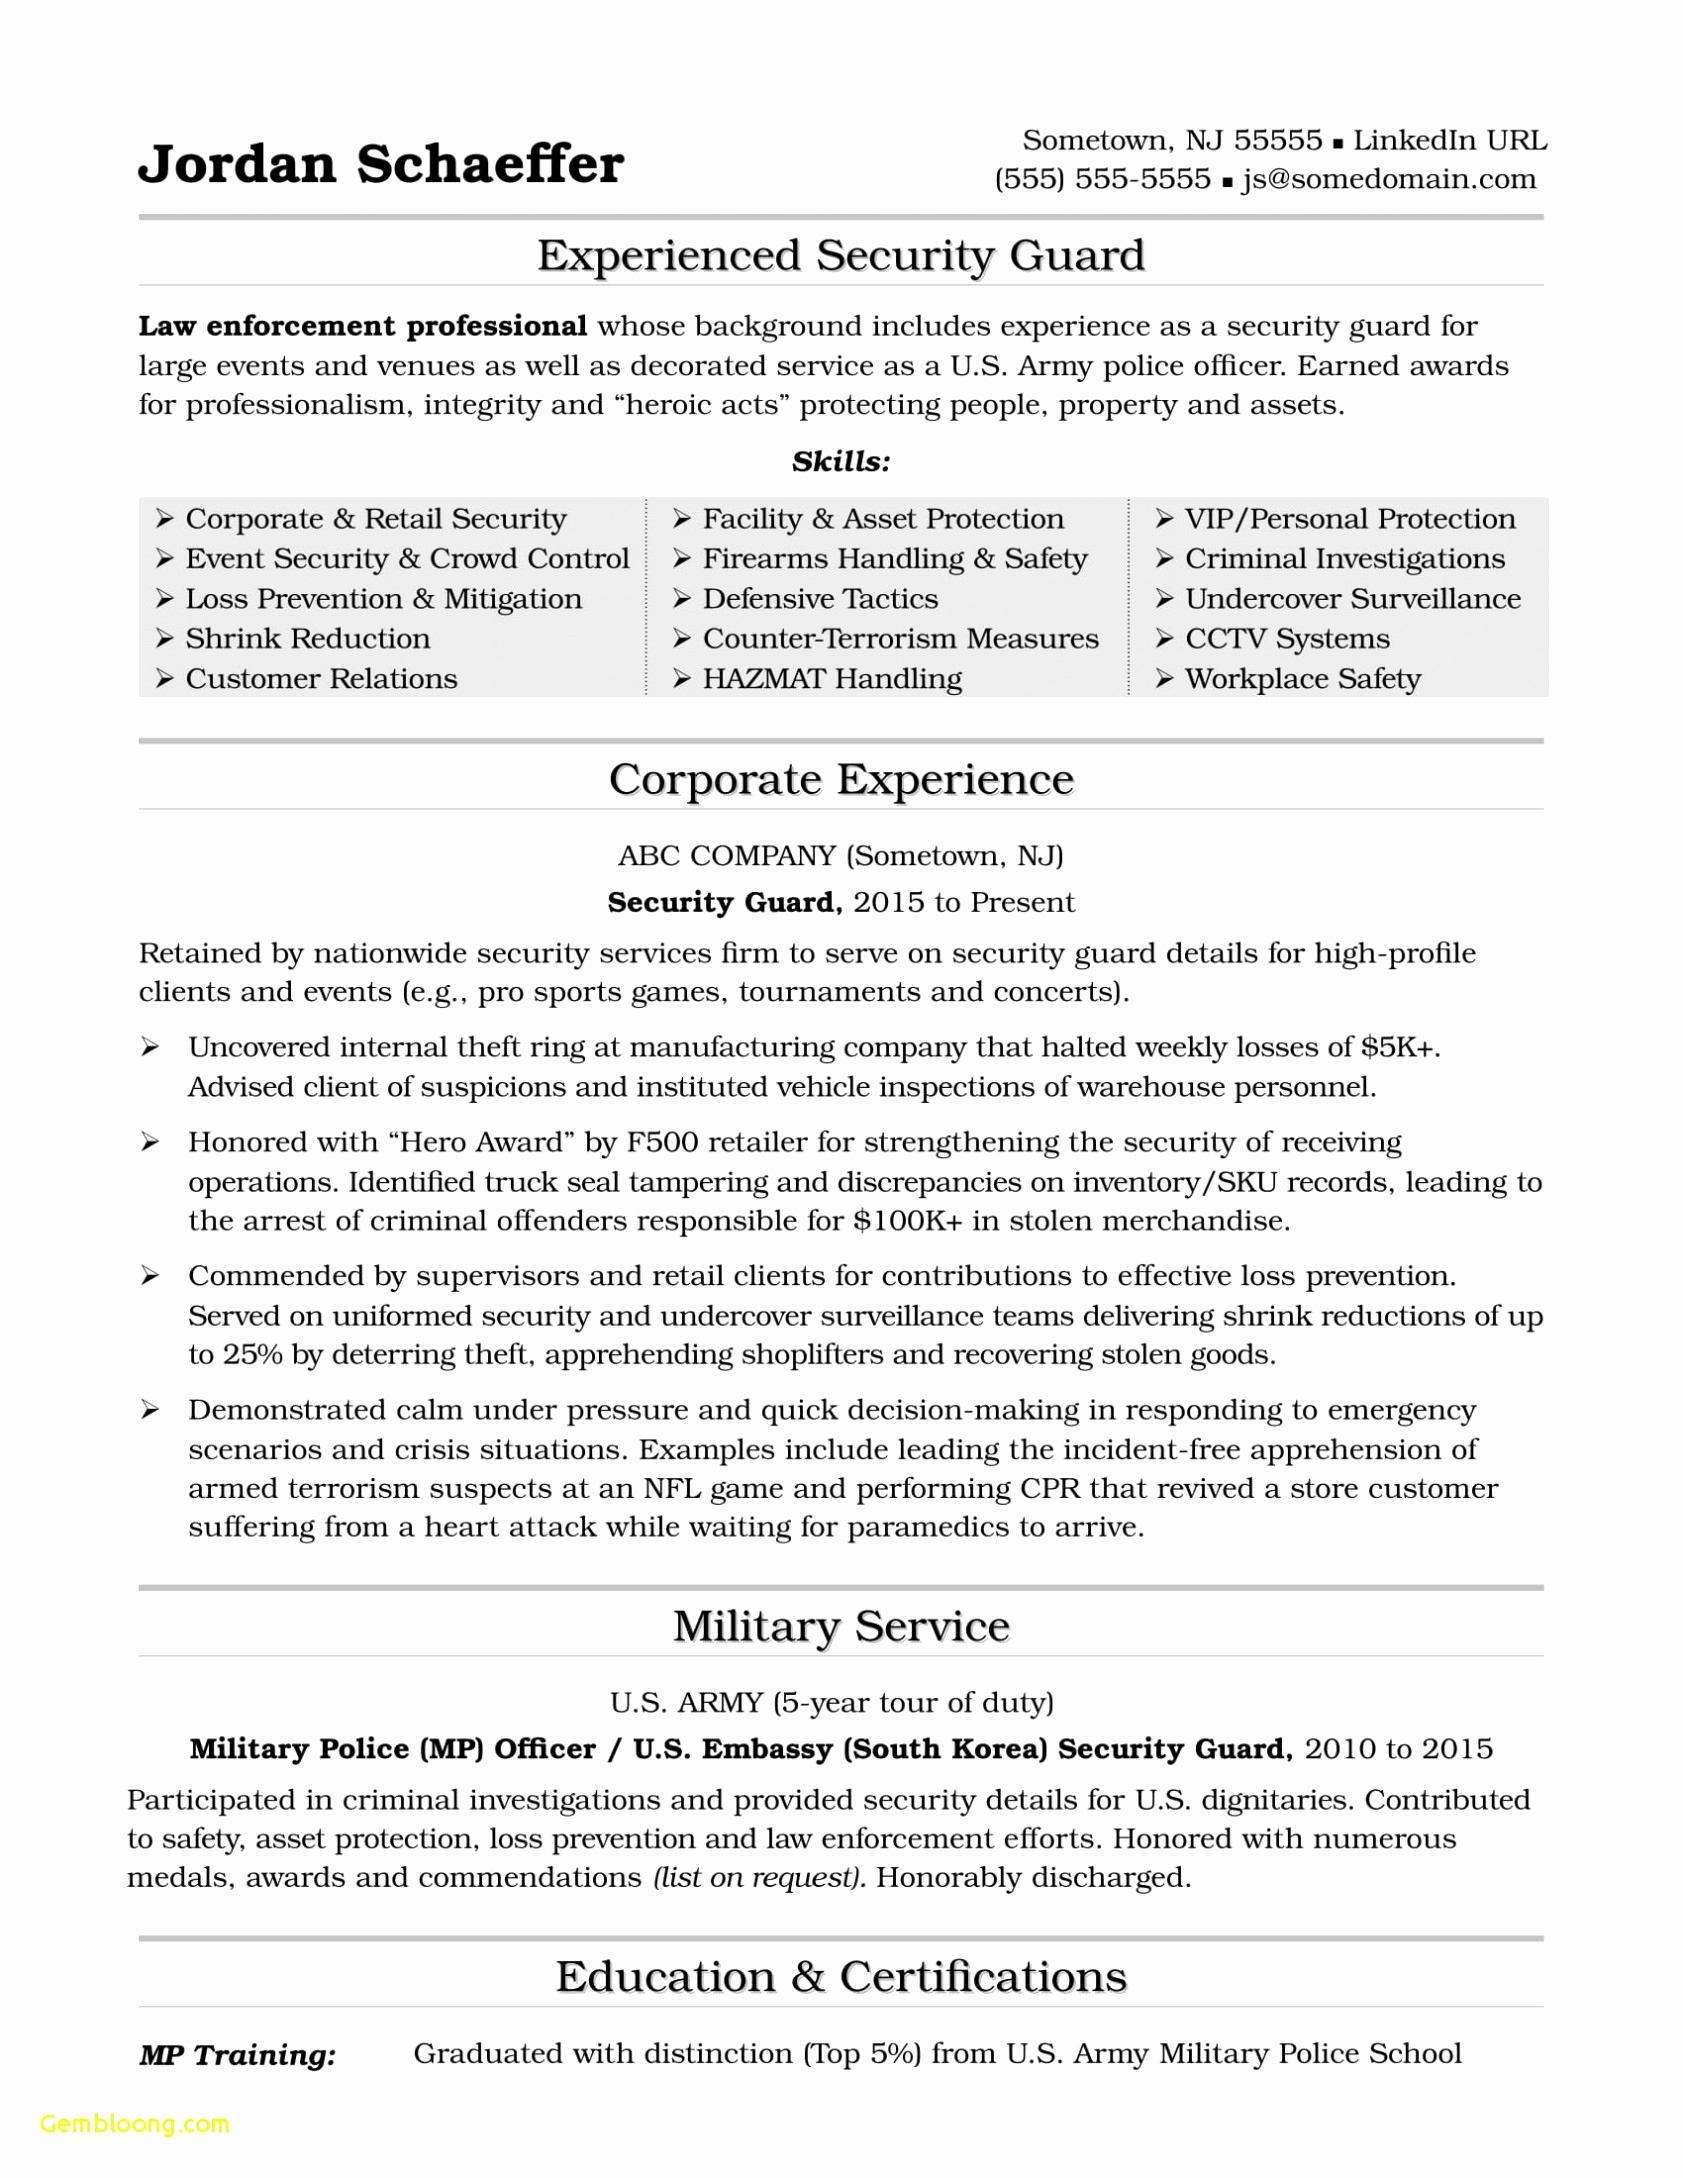 Entry Level Resume No Experience Luxury Entry Level Resume No Experience Sample Work Accounting Hr